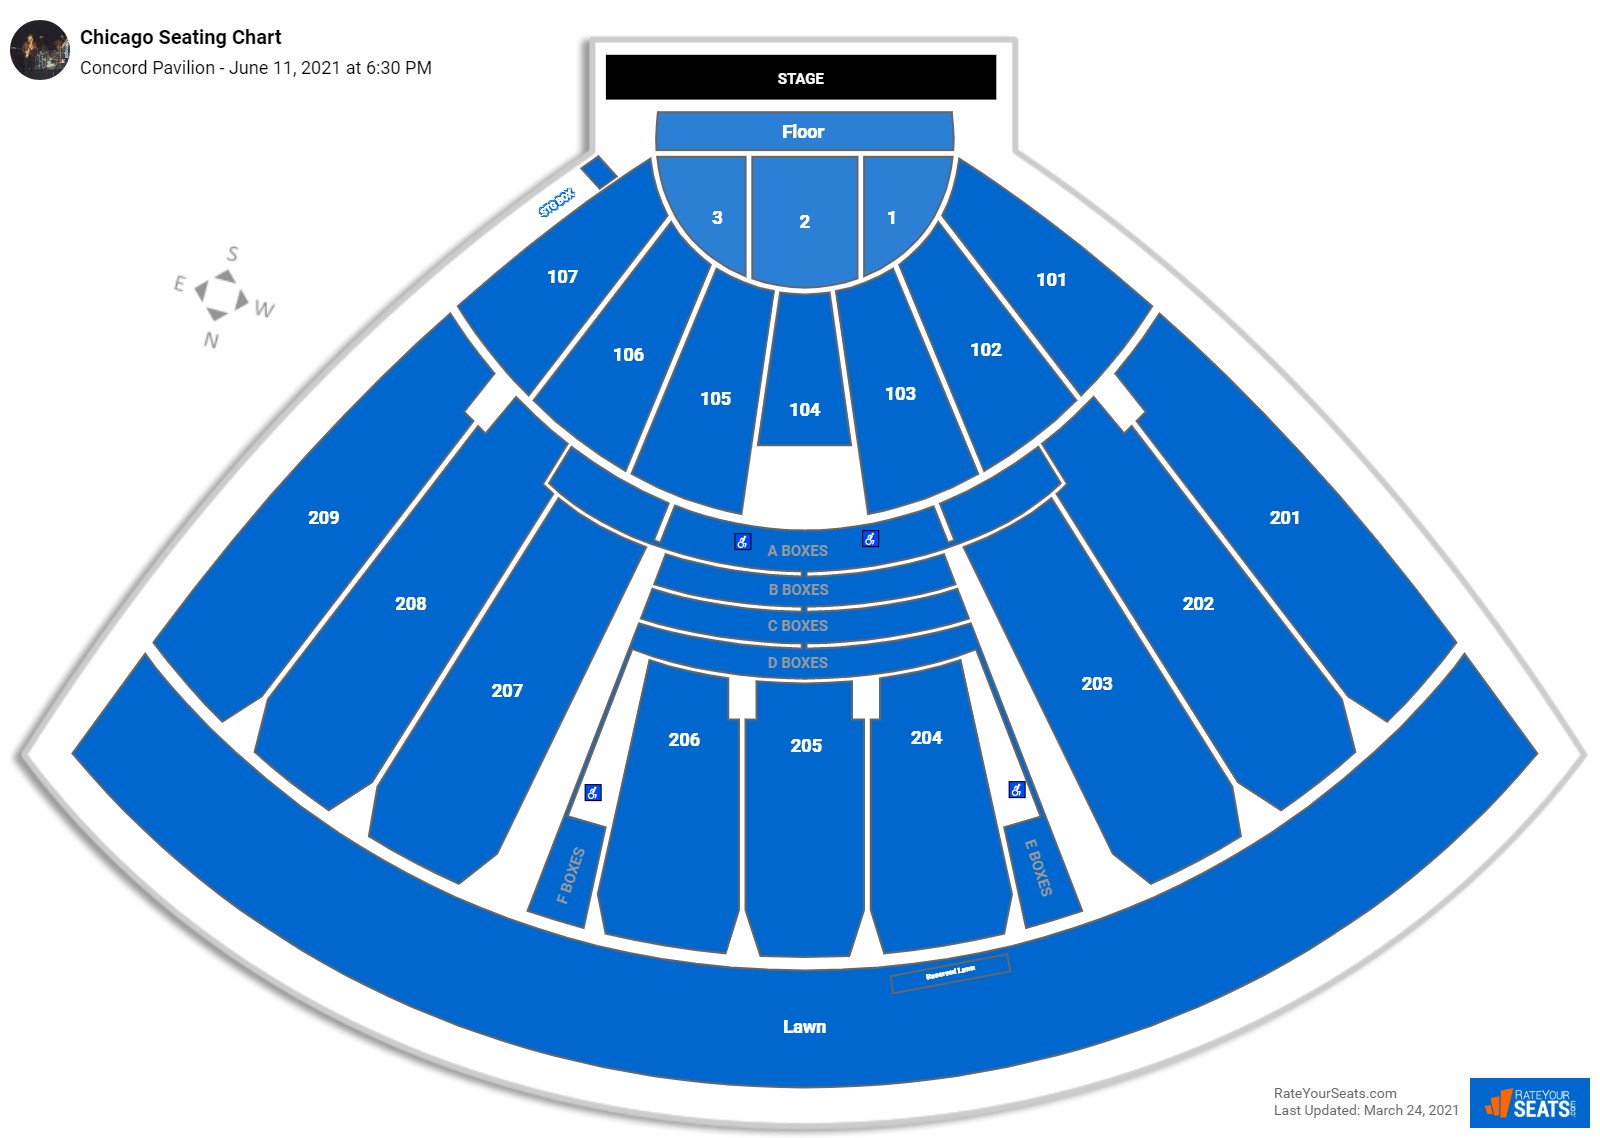 Concord Pavilion Seating Chart With Rows And Seat Numbers